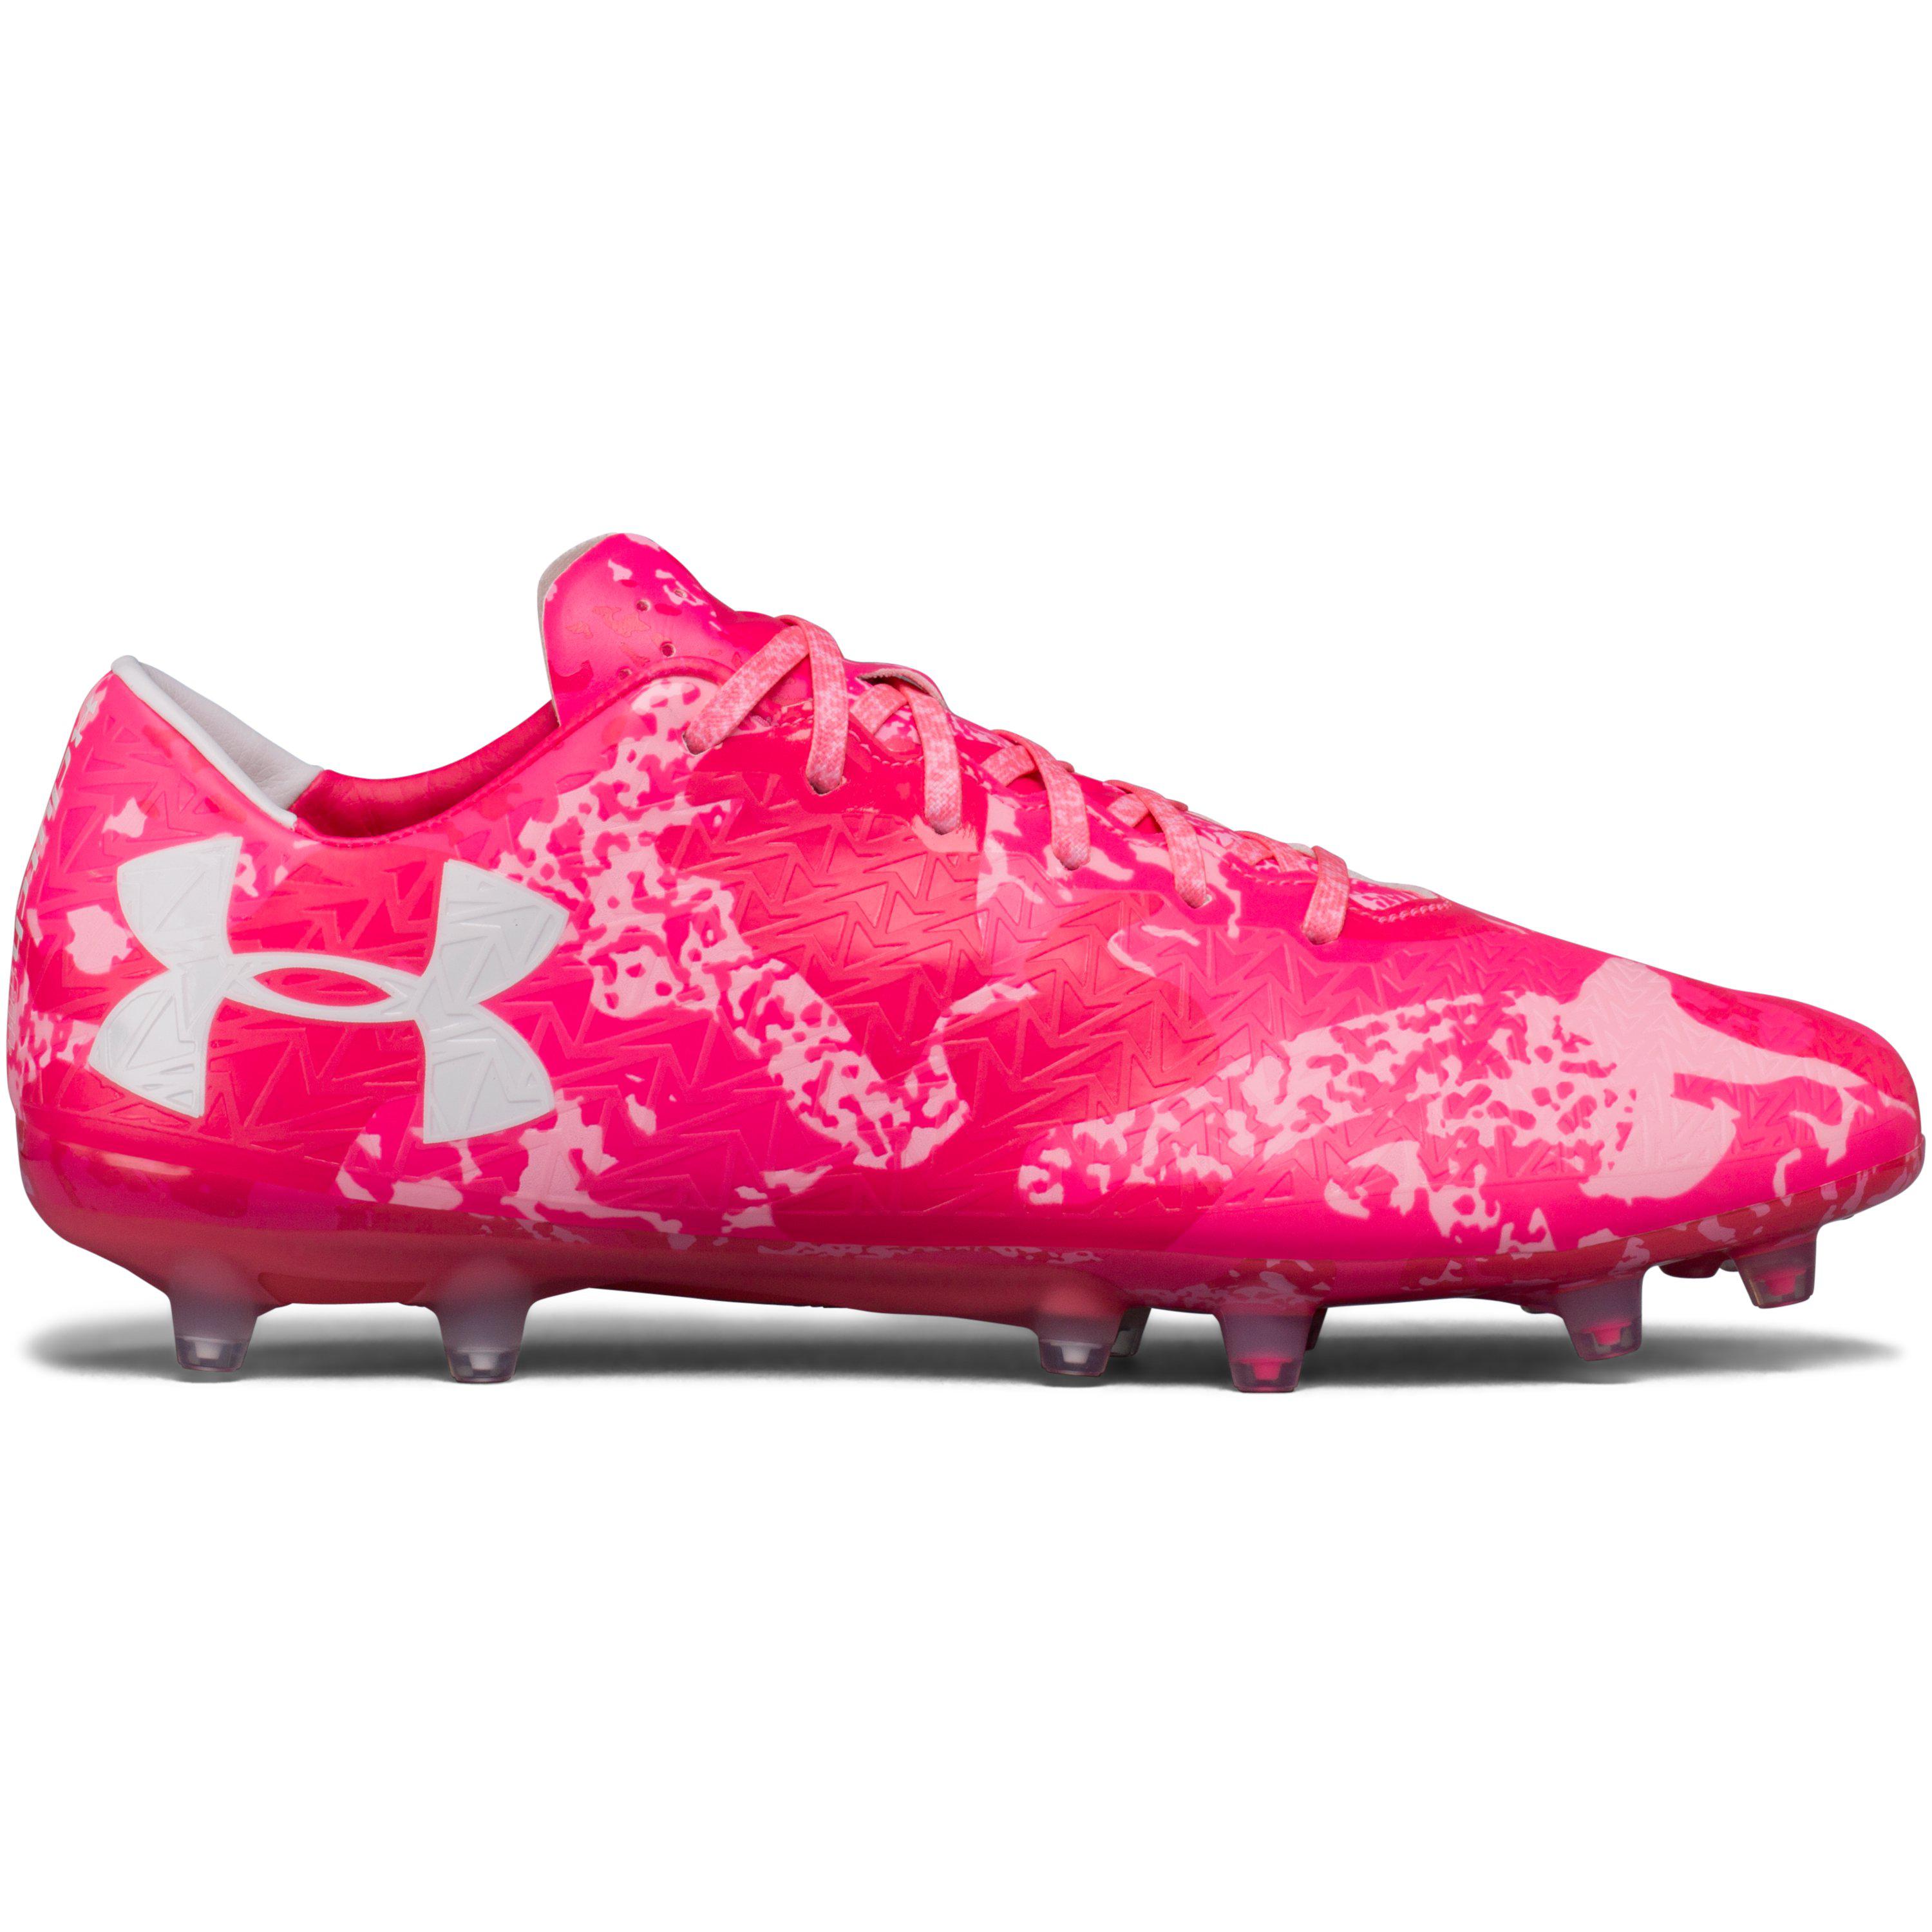 Under Armour Men\'s Firm Lyst Men Ua Limited Cleats Ground— in for Pink Edition Force Clutchfit® | 3.0 Soccer